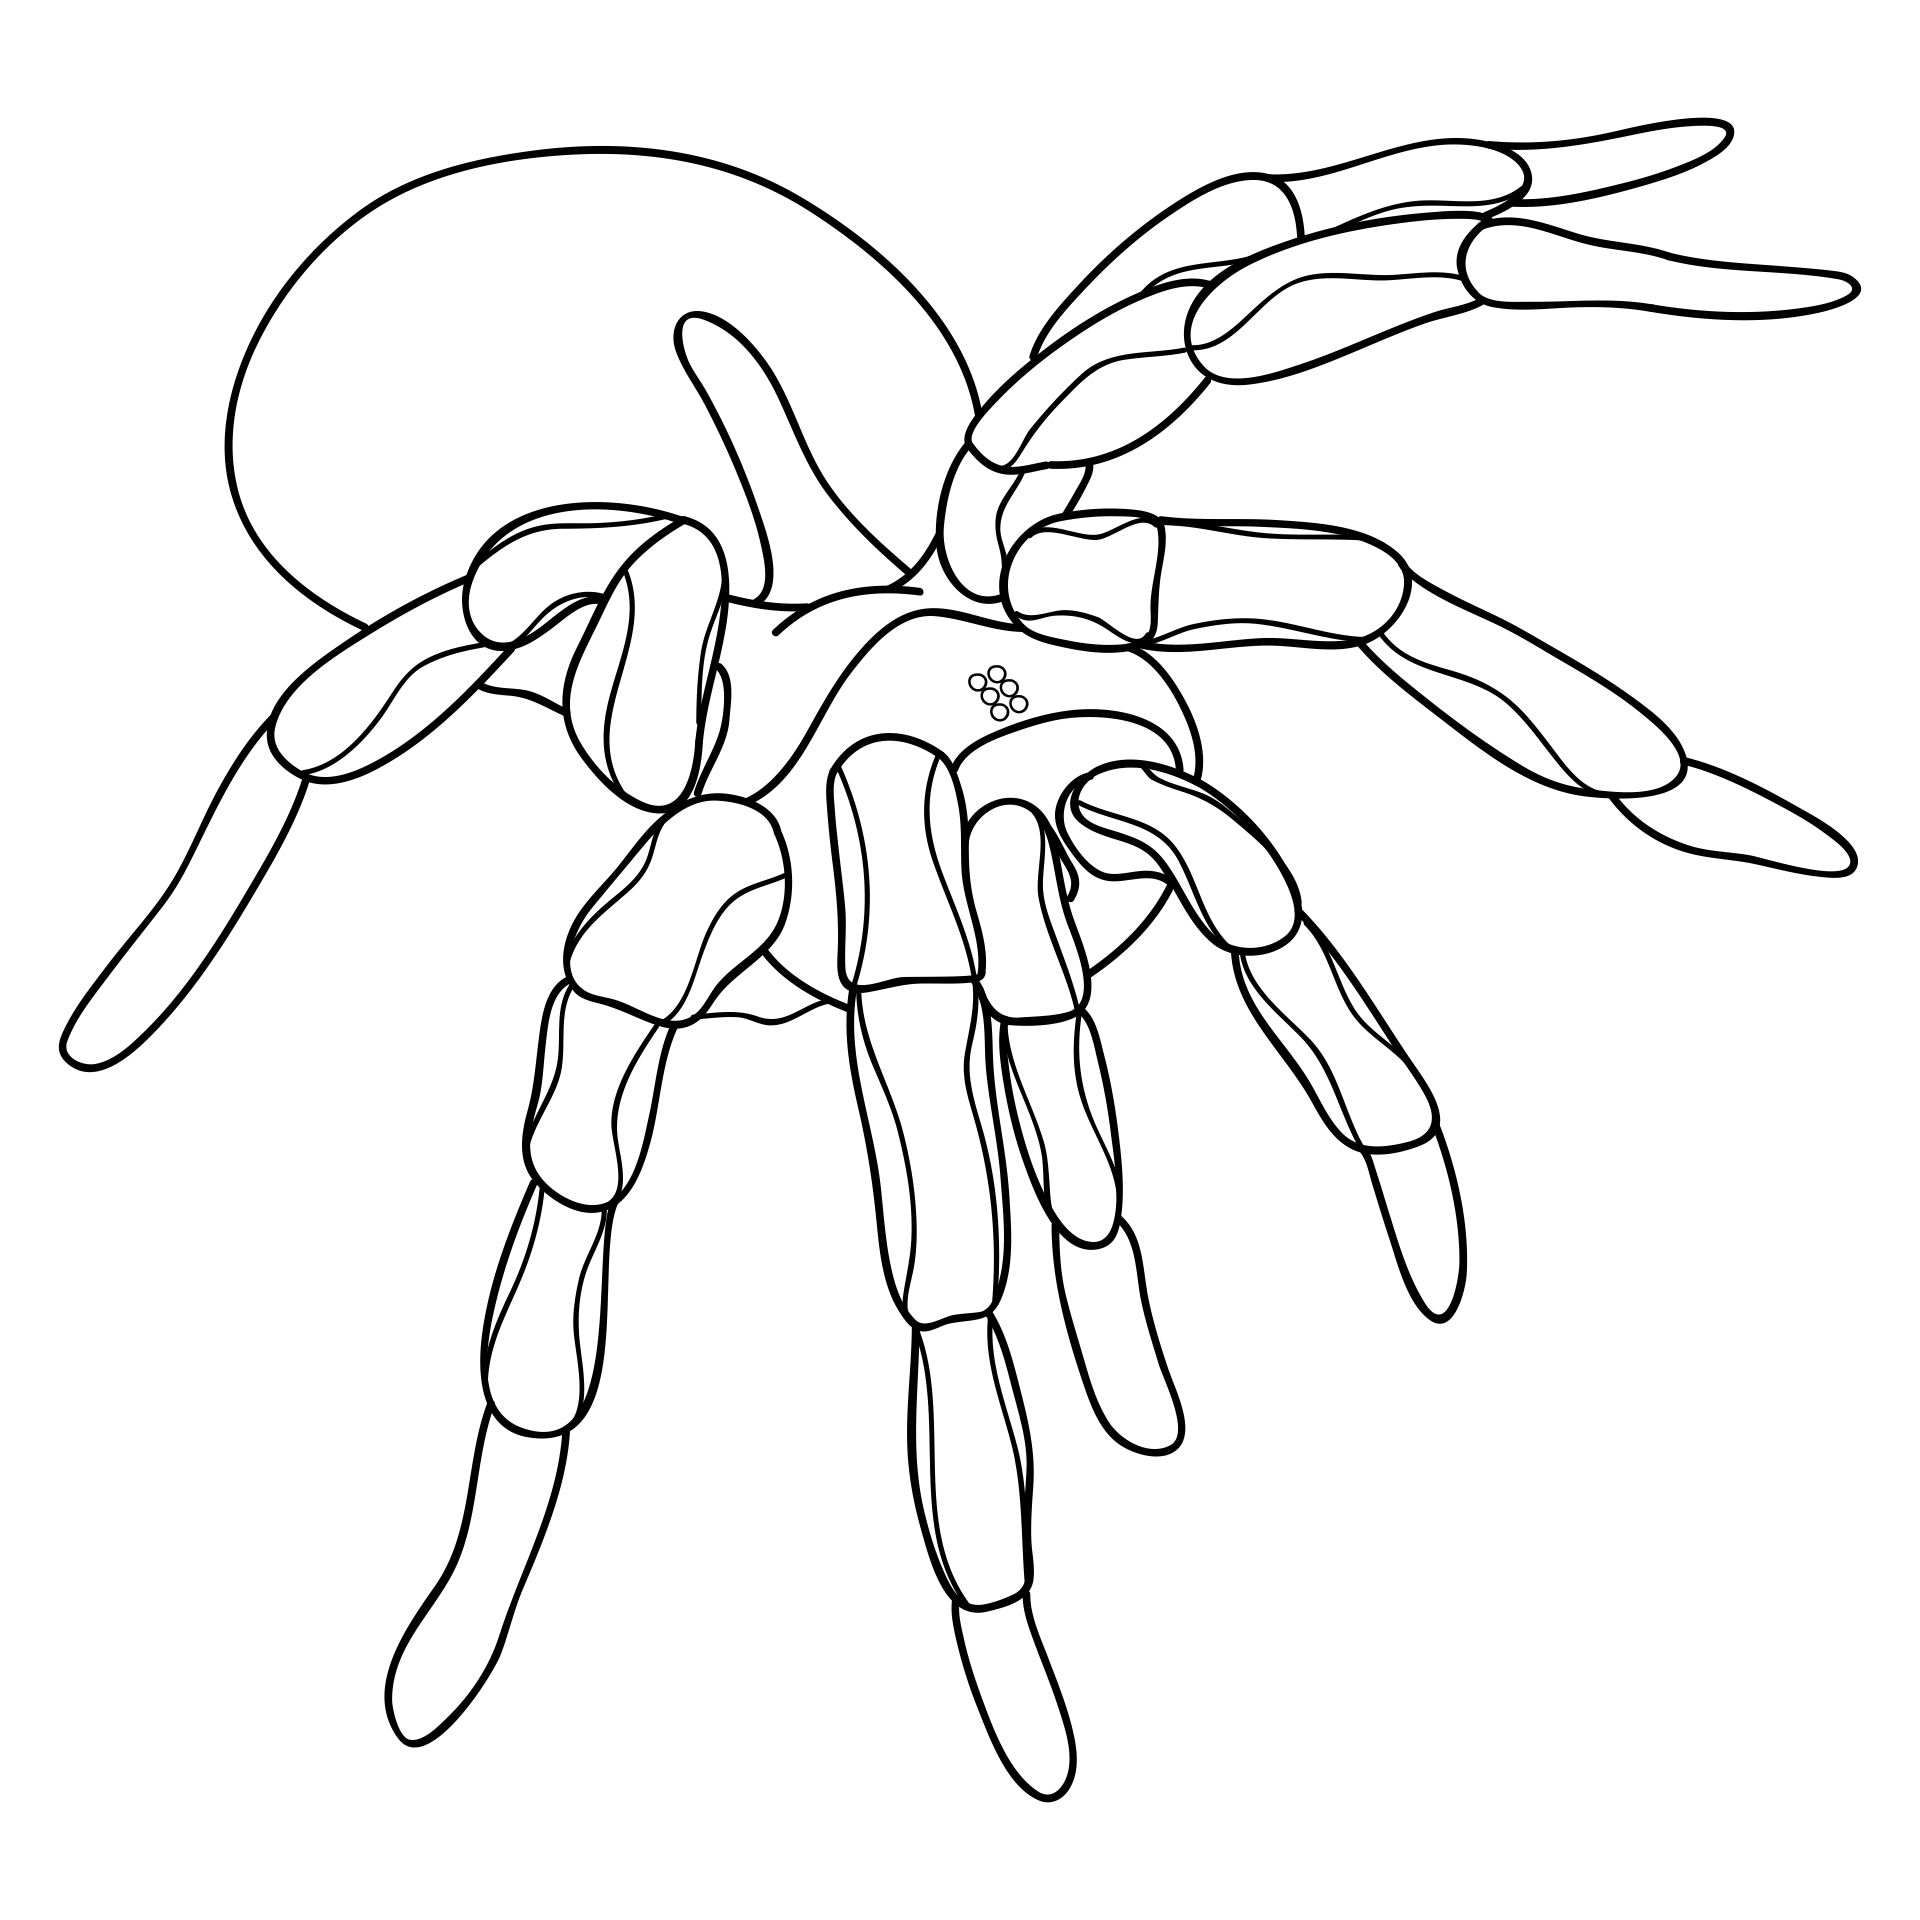 Scary Spider Coloring Pages